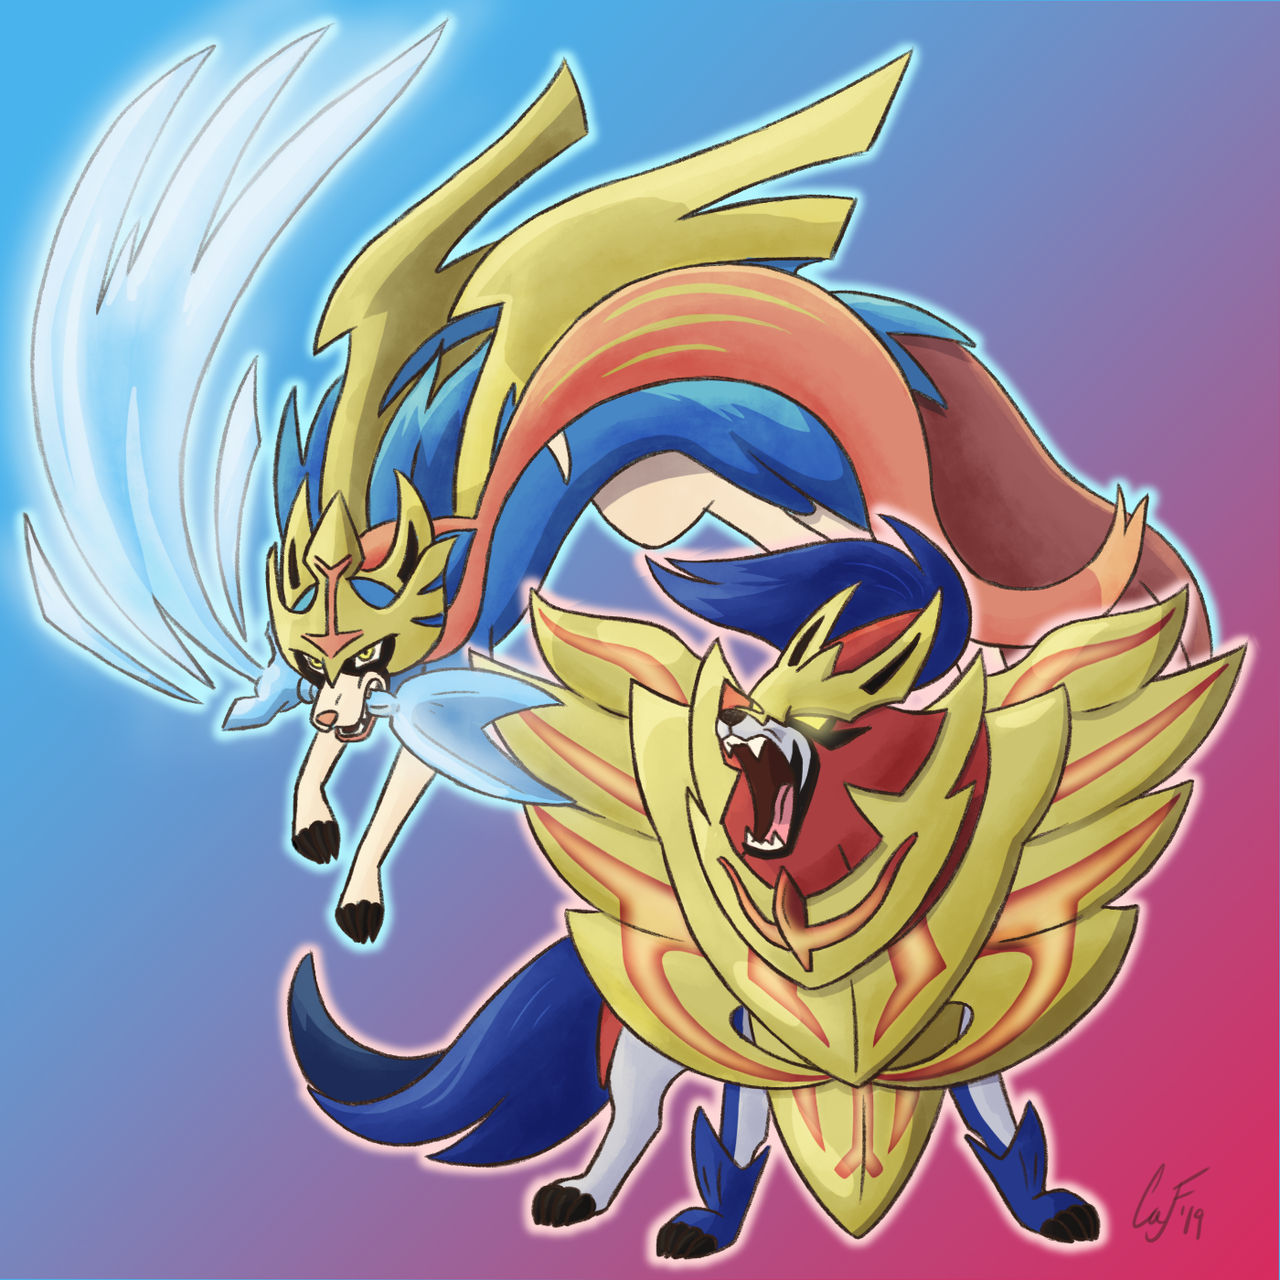 Zacian and Zamazenta's Crowned Forms by WillDinoMaster55 on DeviantArt